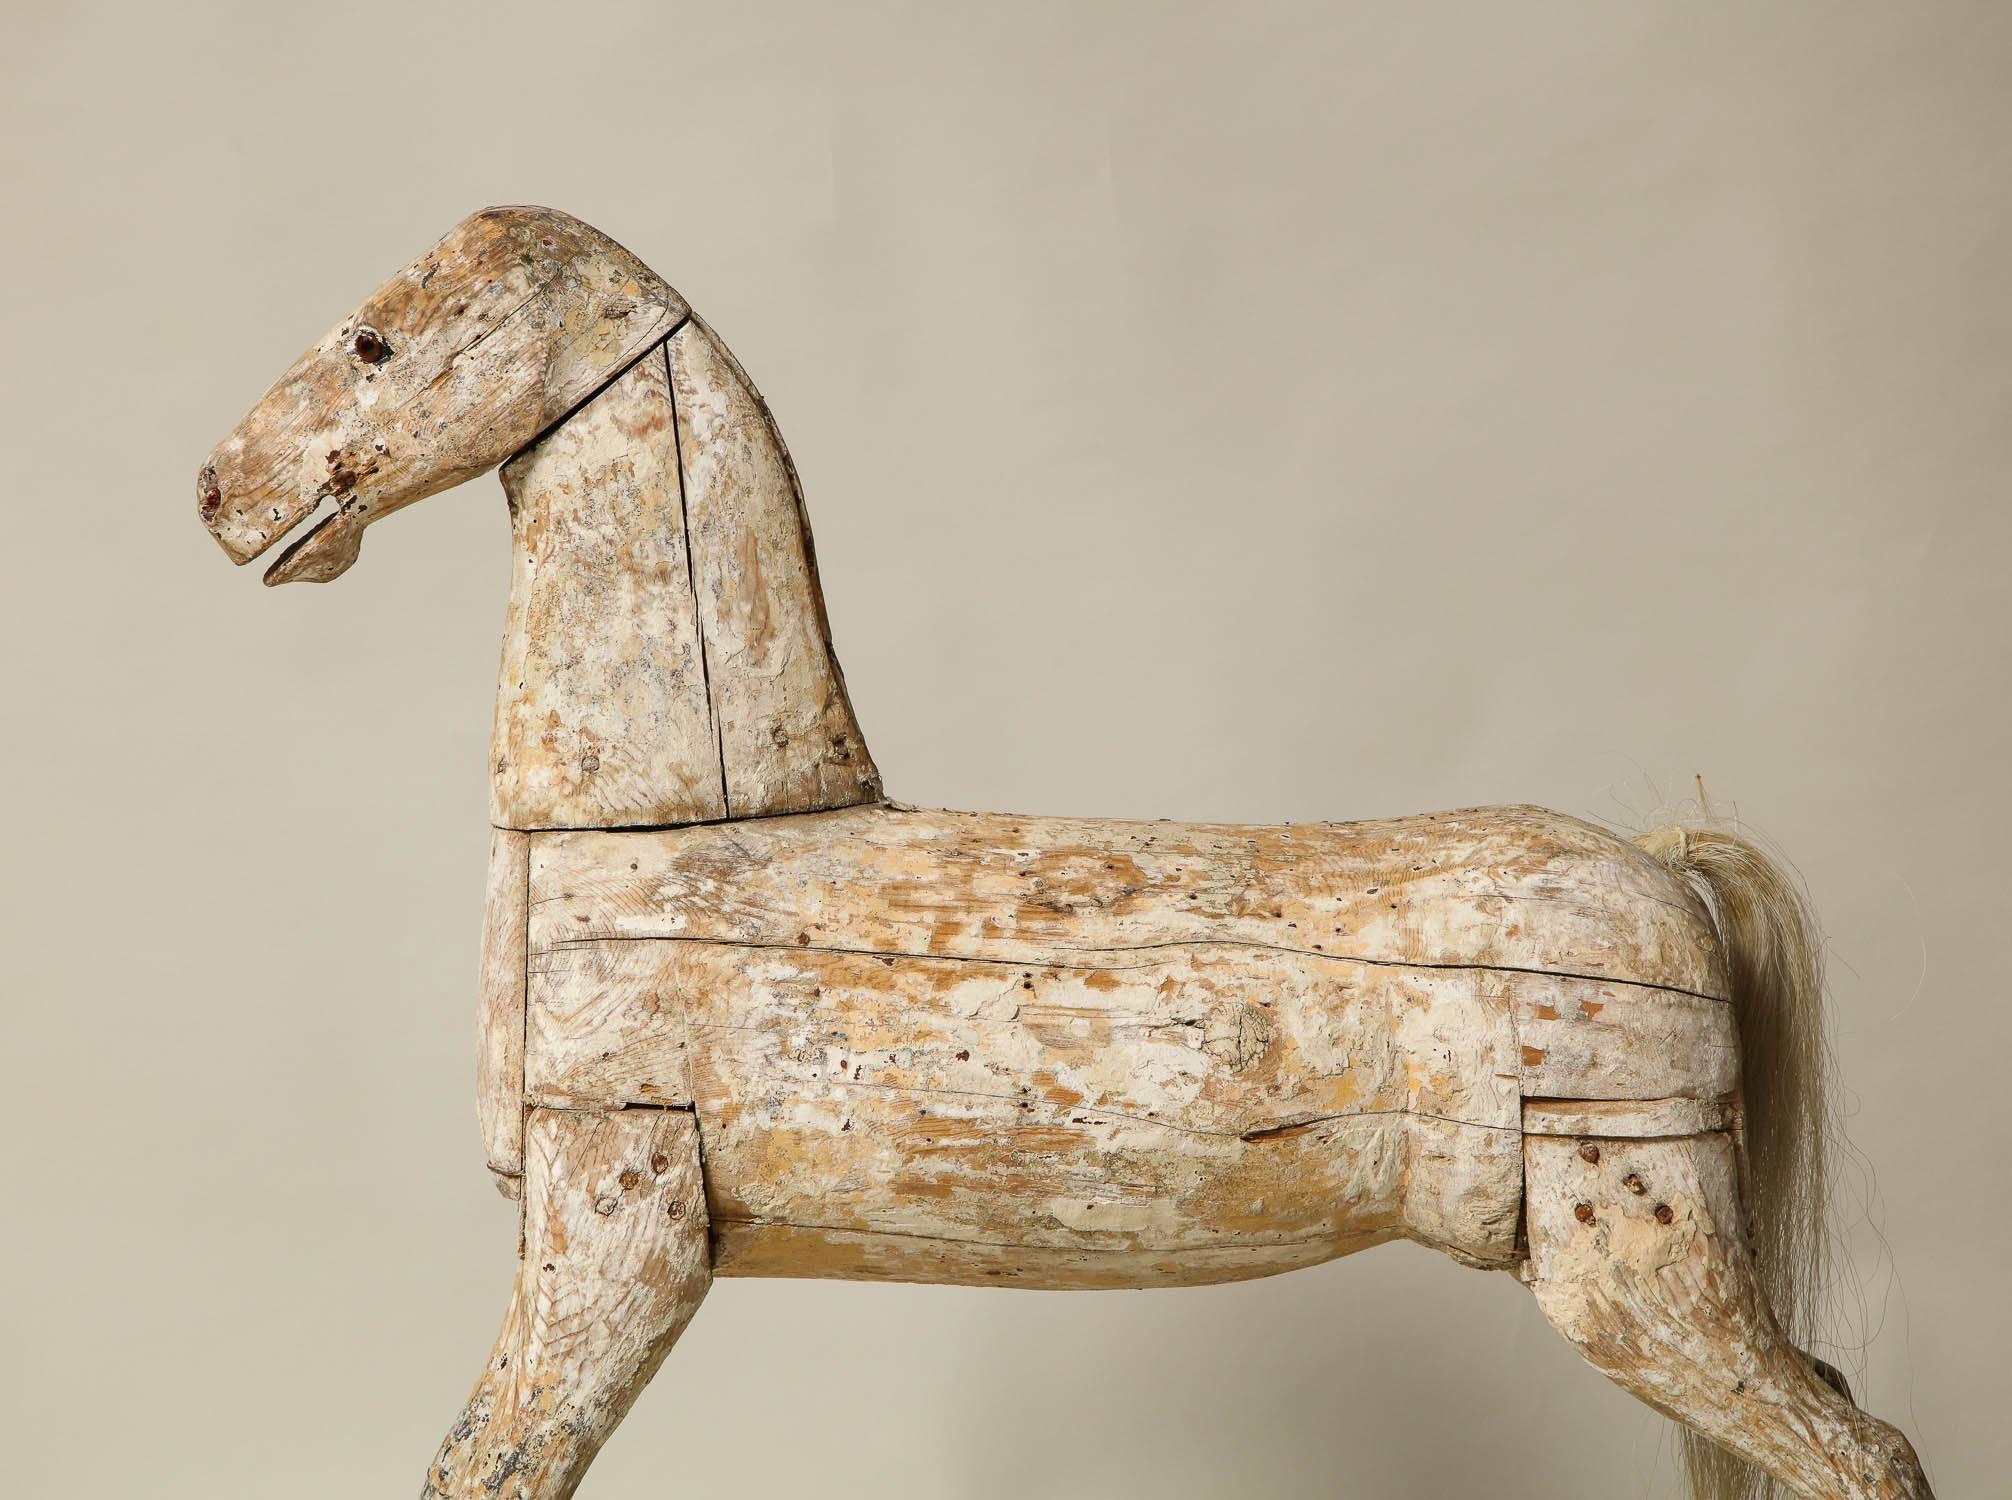 A sculptural, hand-carved 19th century folk art rocking horse in its original chalk white paint on carved and auburn painted rockers. This horse possesses an alert and lively stance, and an original distressed painted surface.  He is a fine piece